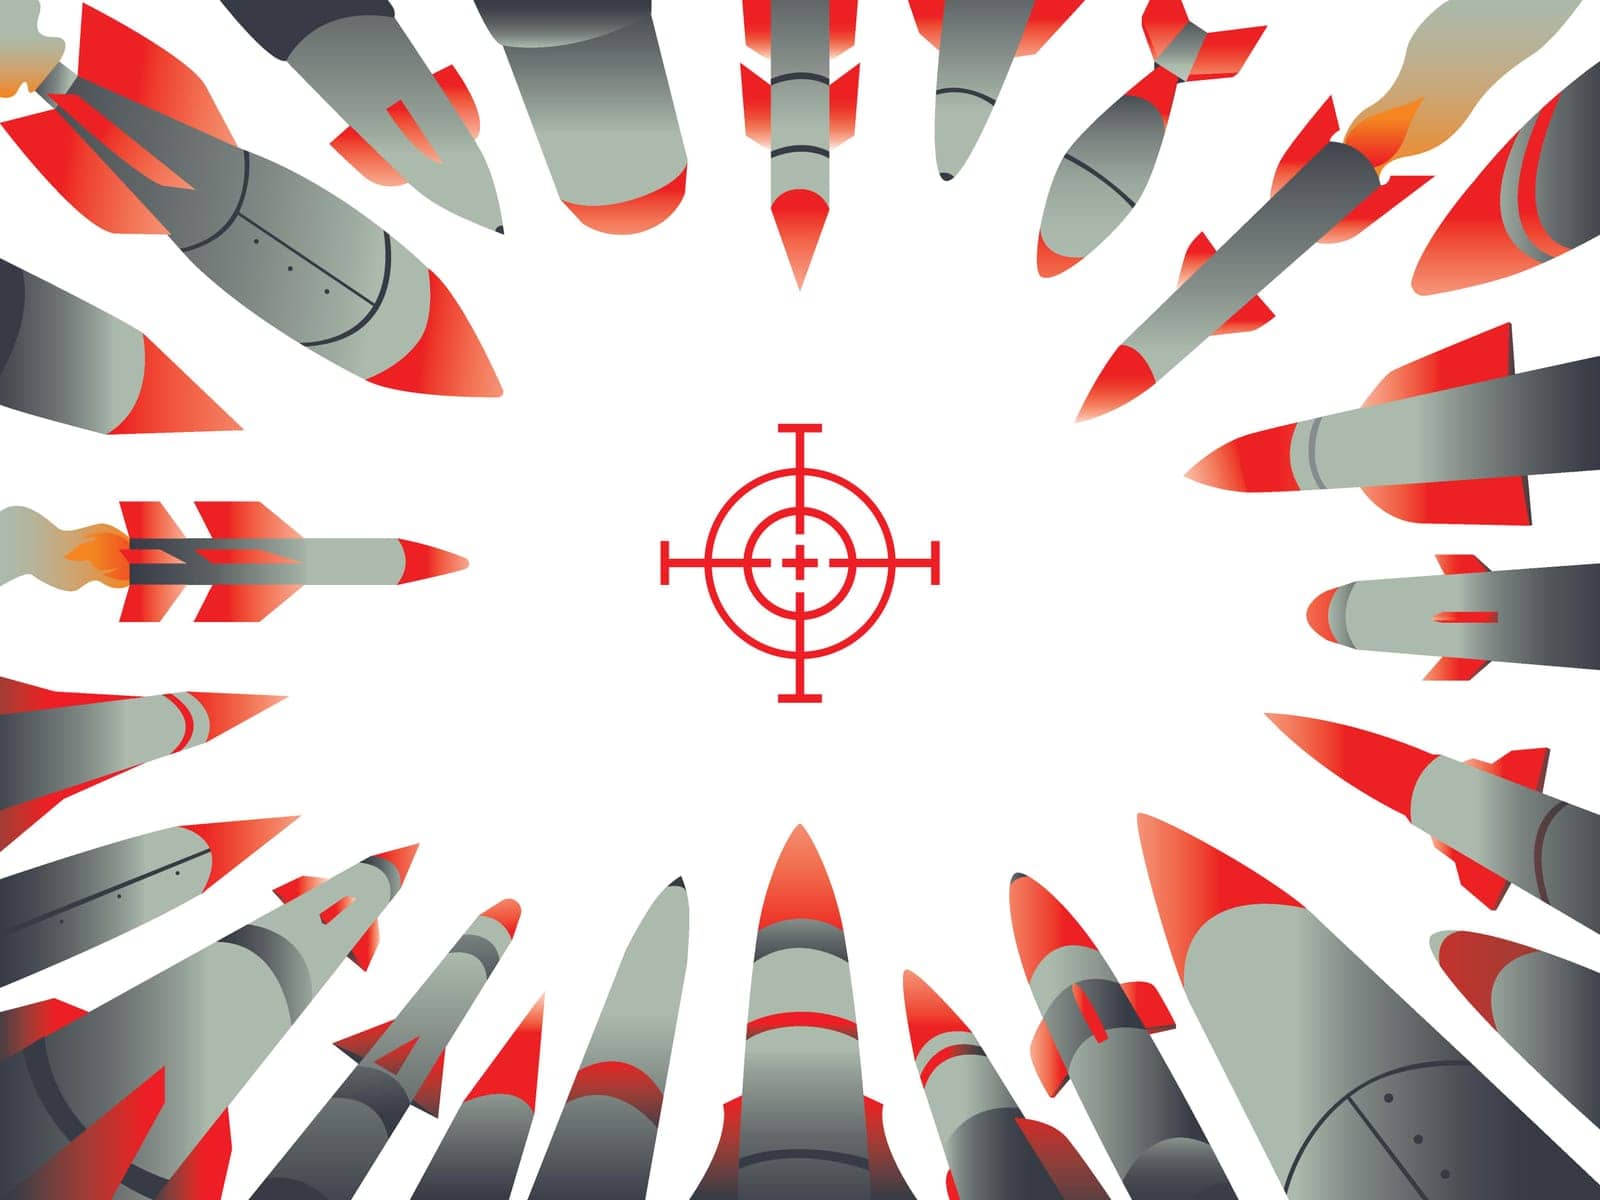 Concept illustration for conflict, war or any type of attack, depicting nuclear missiles headed towards their target. 